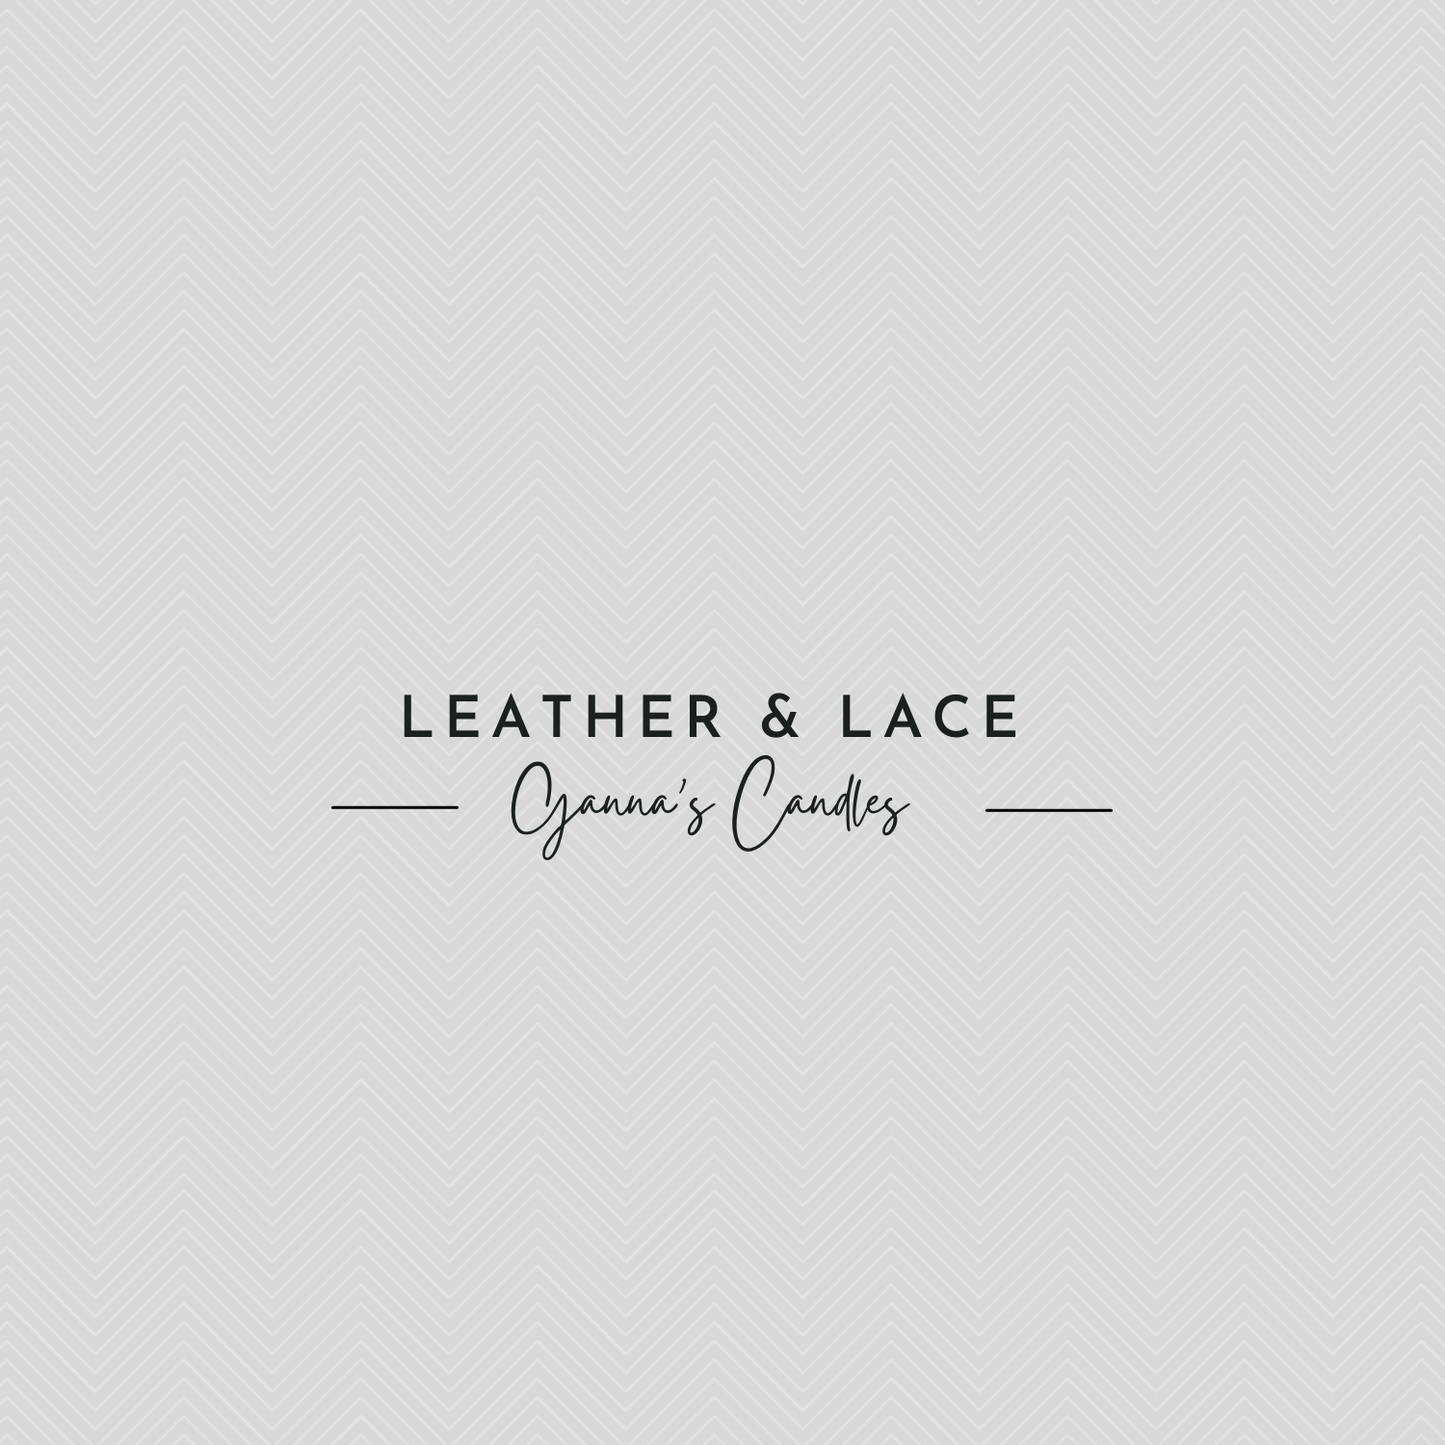 Leather and Lace